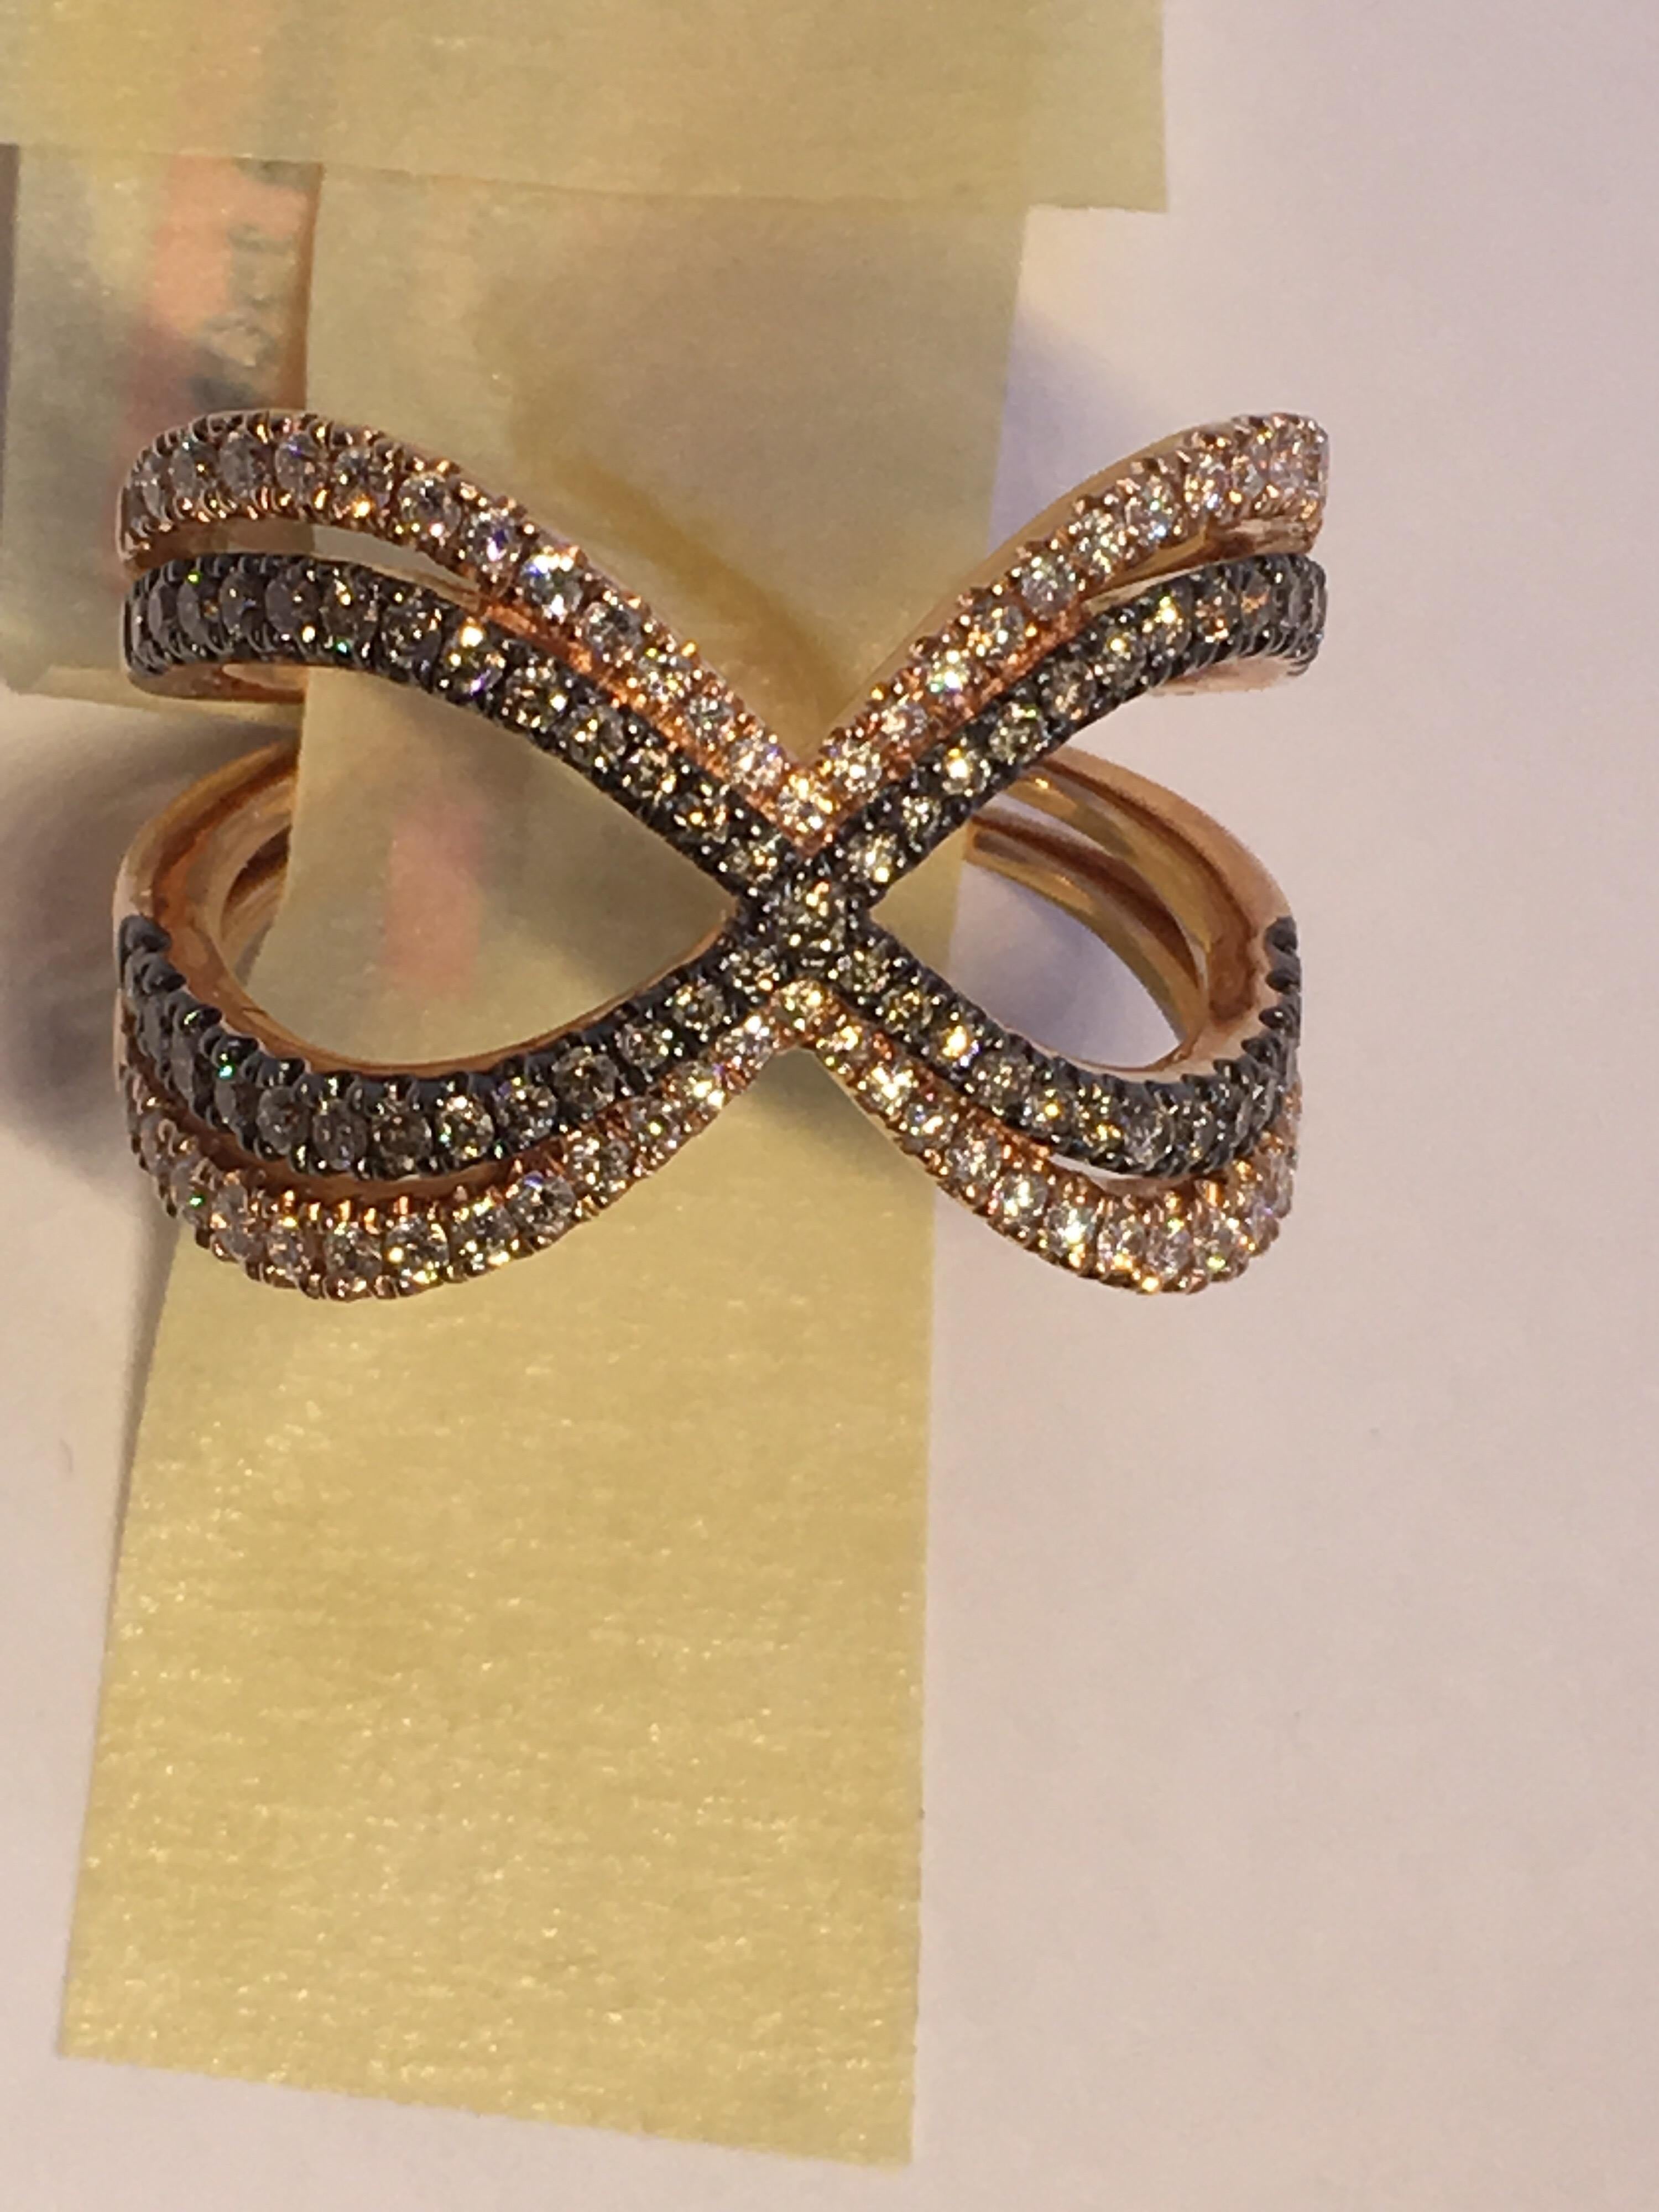 Brown and White Diamond Ring Set in 14 Karat Gold For Sale 4